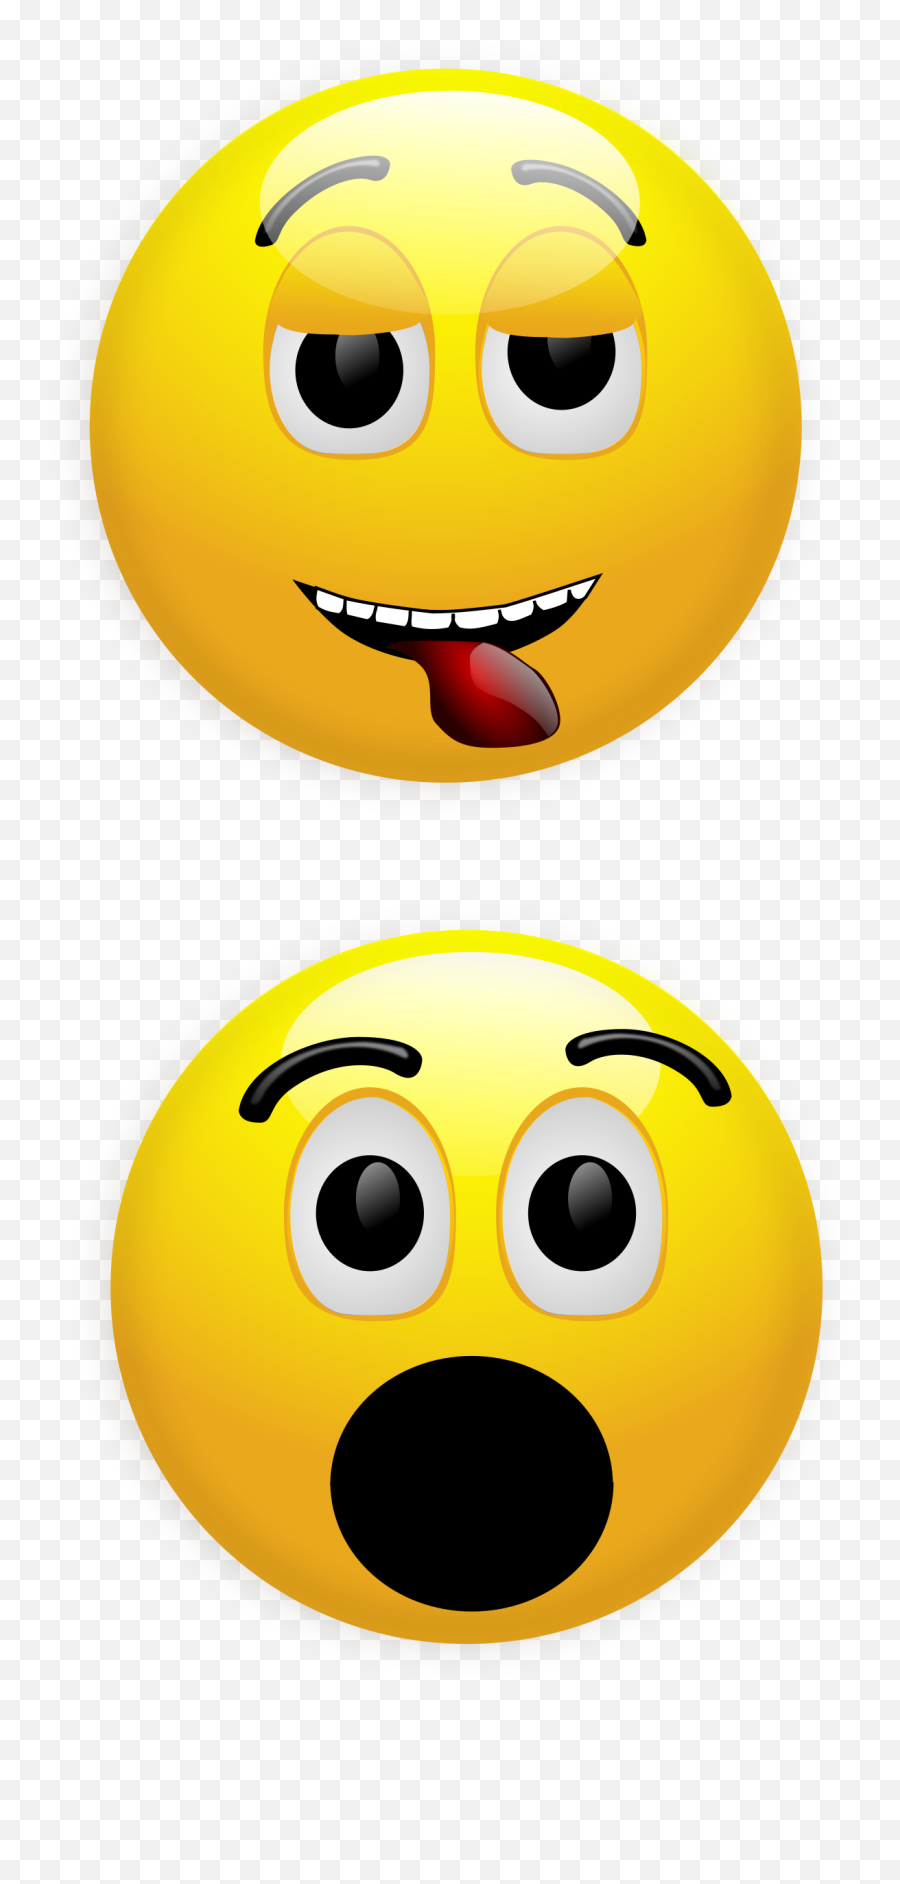 Free Photo Round Oh Tongue Out Yellow - Happy Smiley Emoji,Emoticon Tongue Out